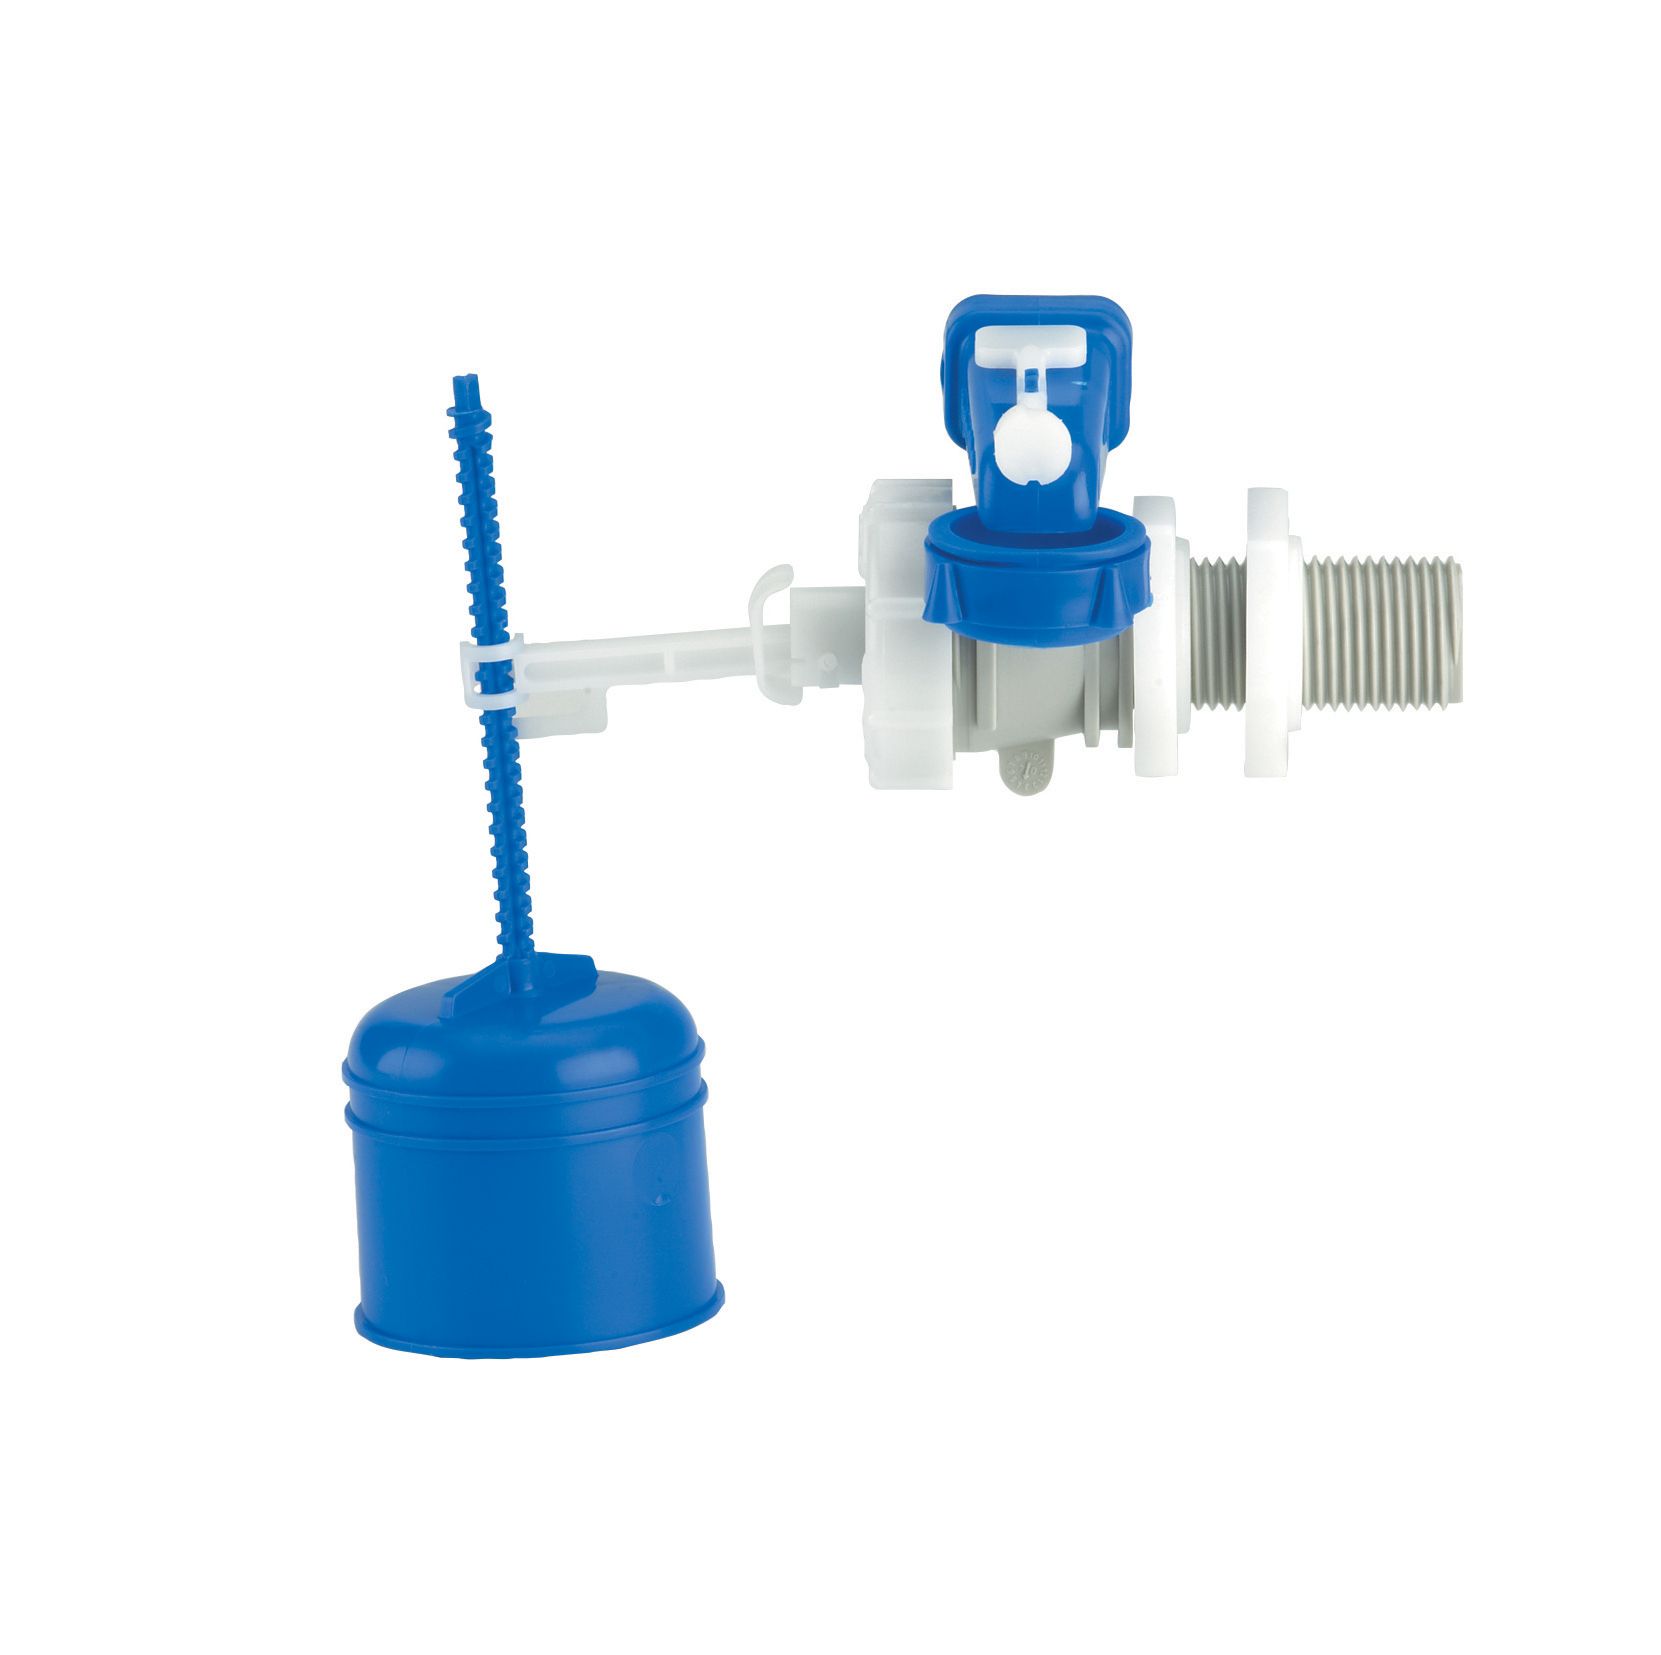 Image of Dudley Side Inlet Valve with Standard Tail